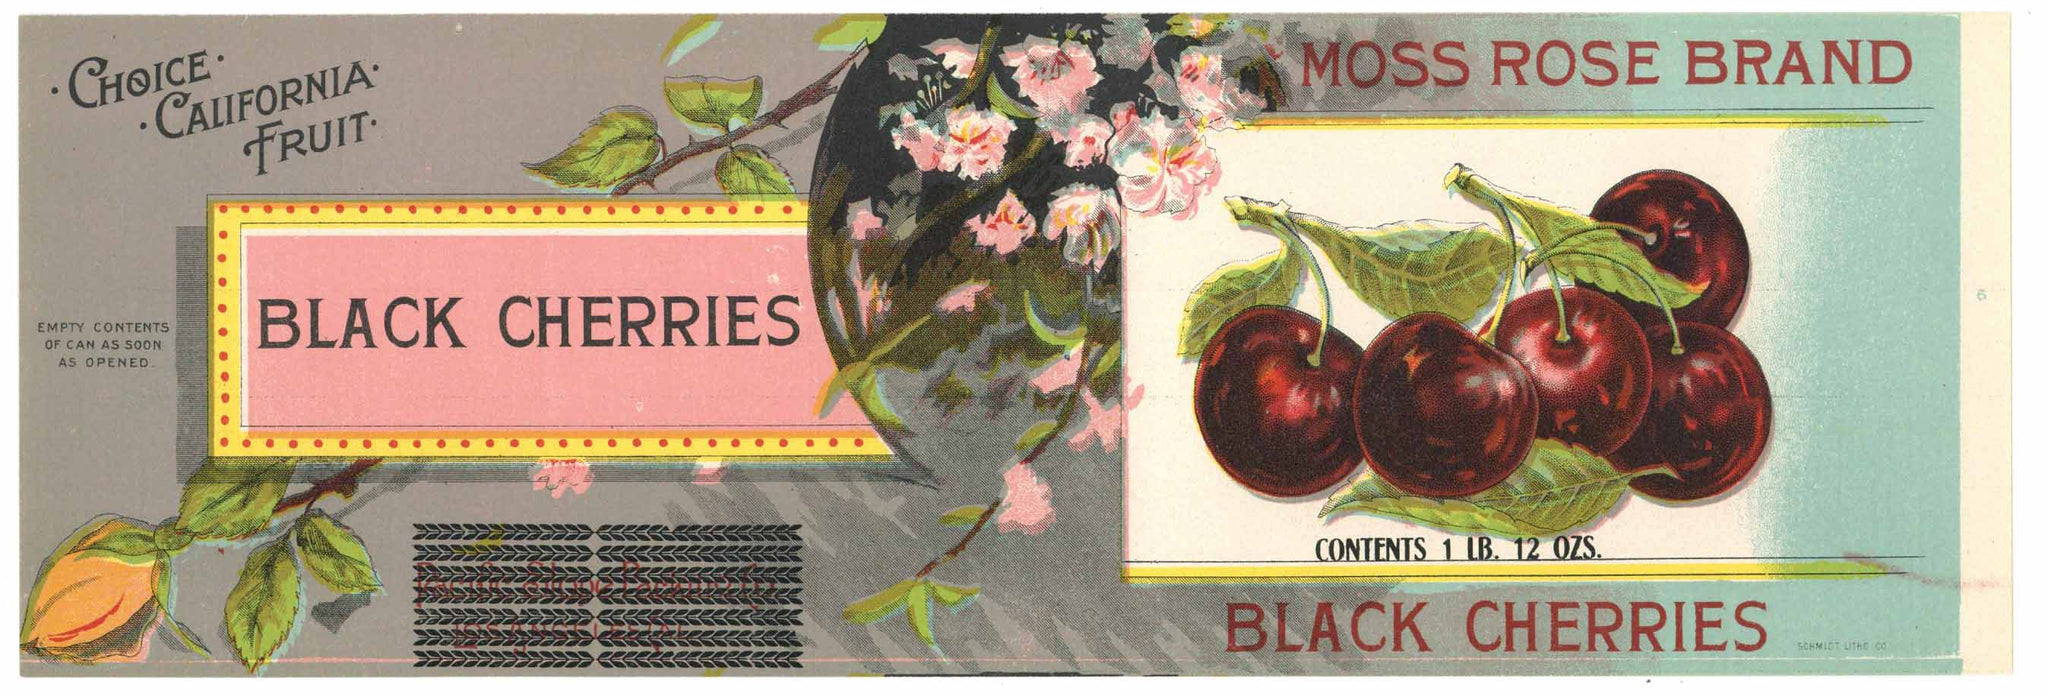 Moss Rose Brand Vintage Cherry Can Label